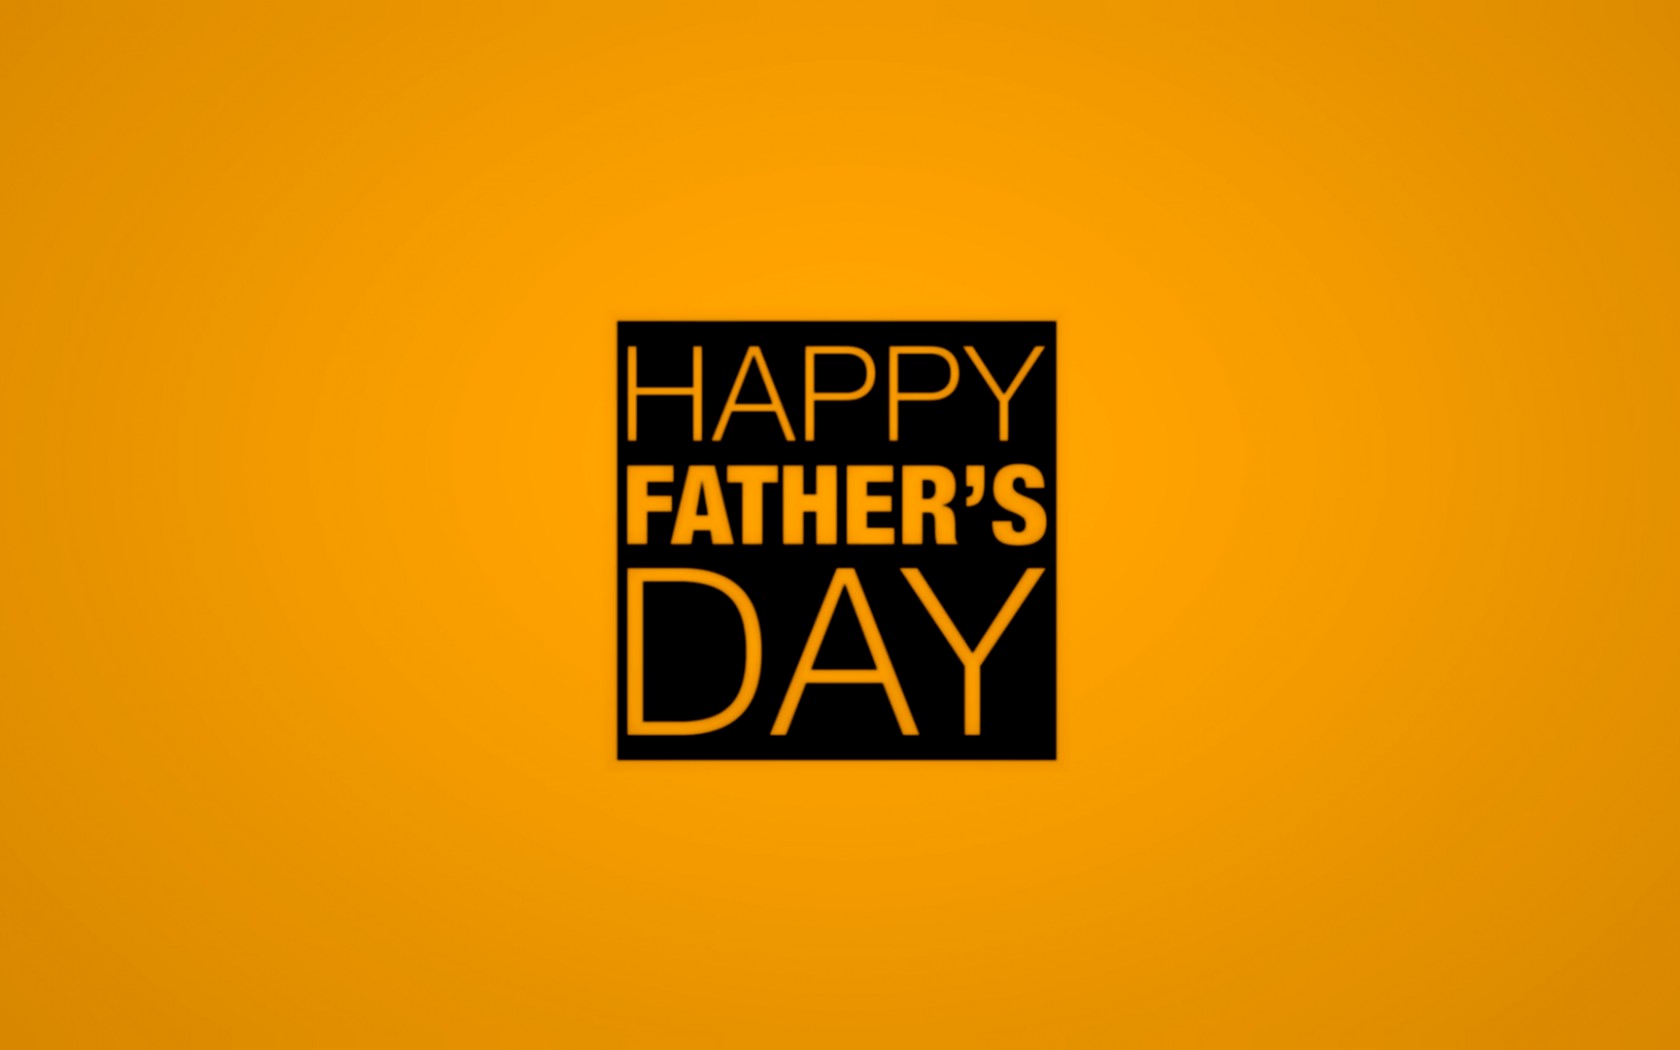 Happy Fathers Day Wallpaper HD 2018 Image Free Download